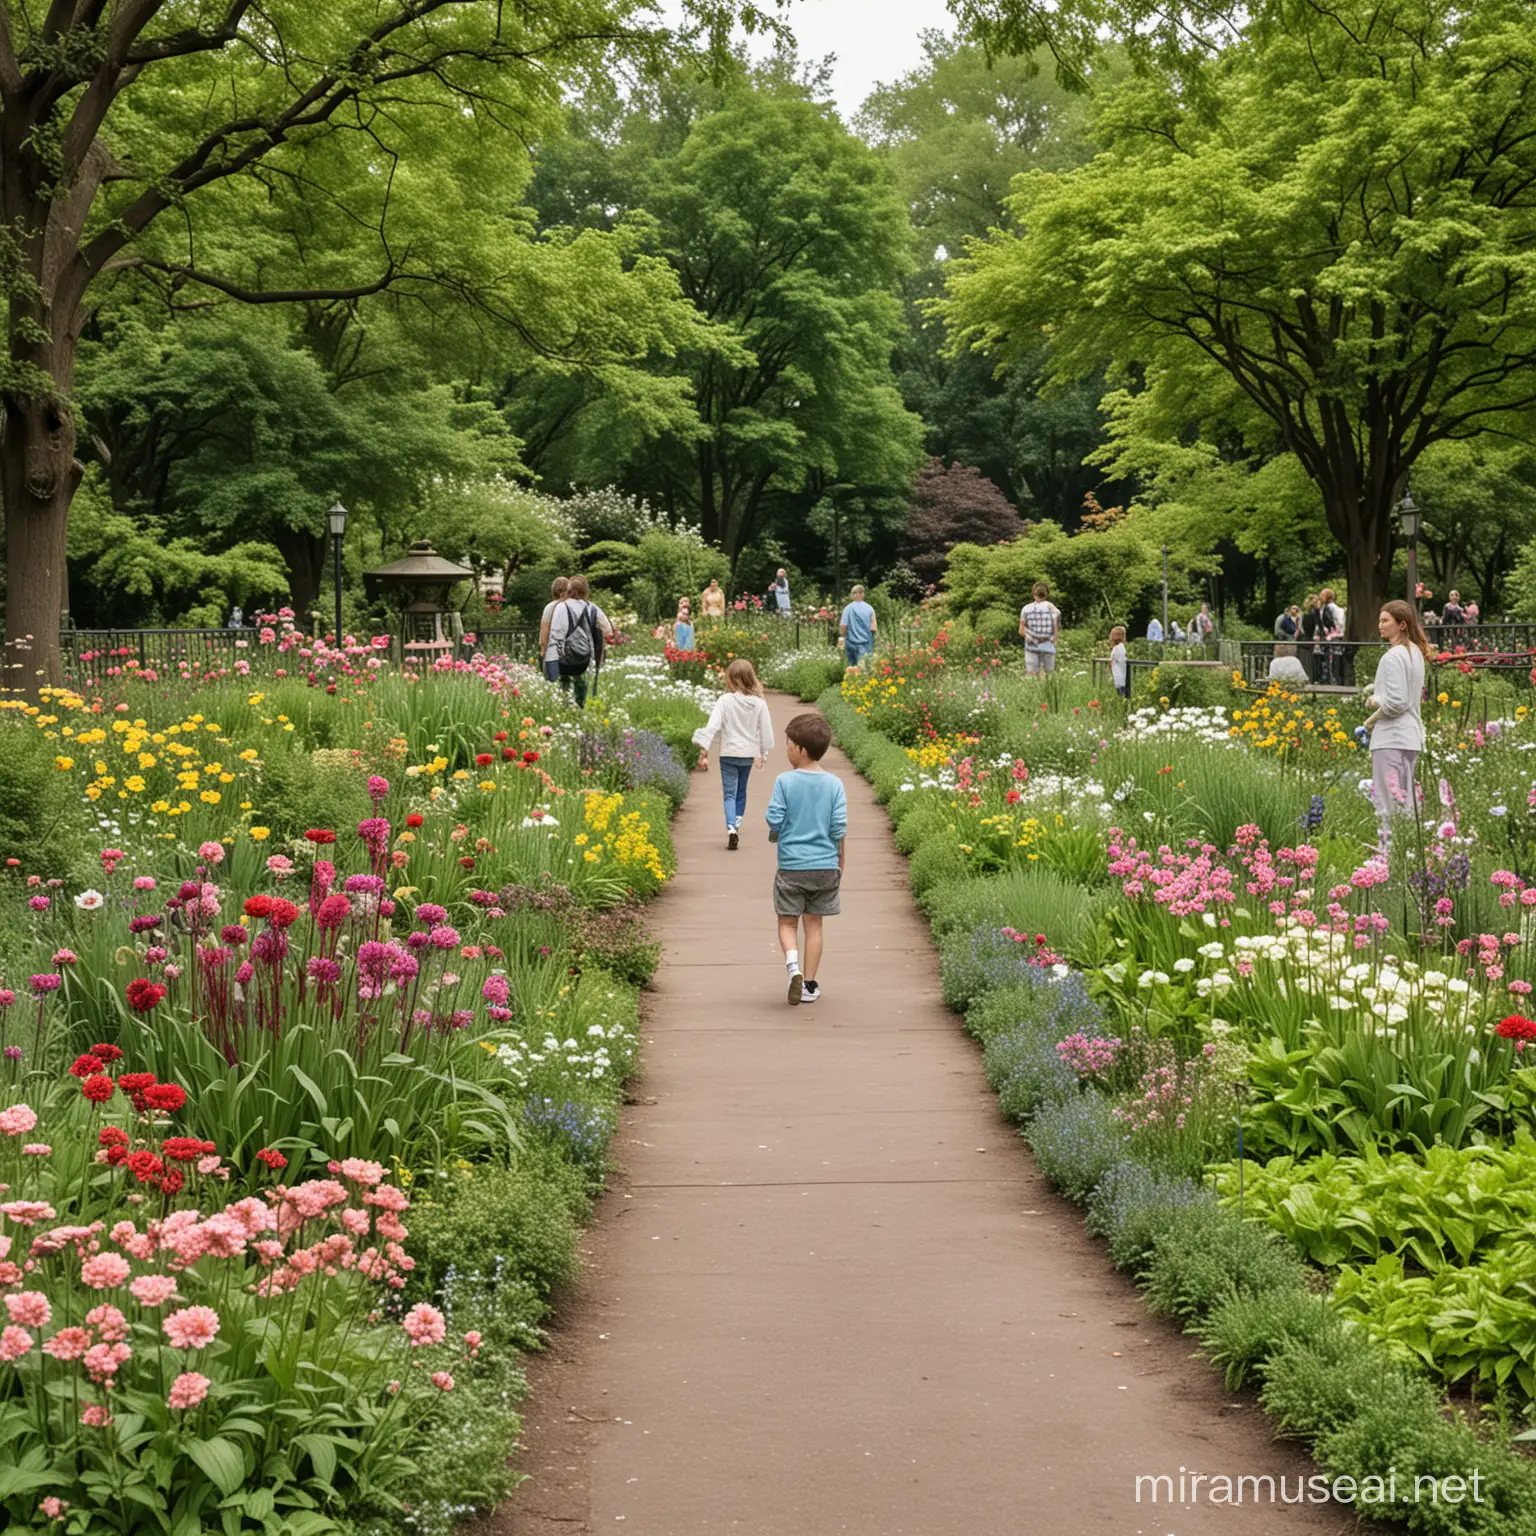 Vibrant Public Garden Bursting with Blooms and Youthful Visitors